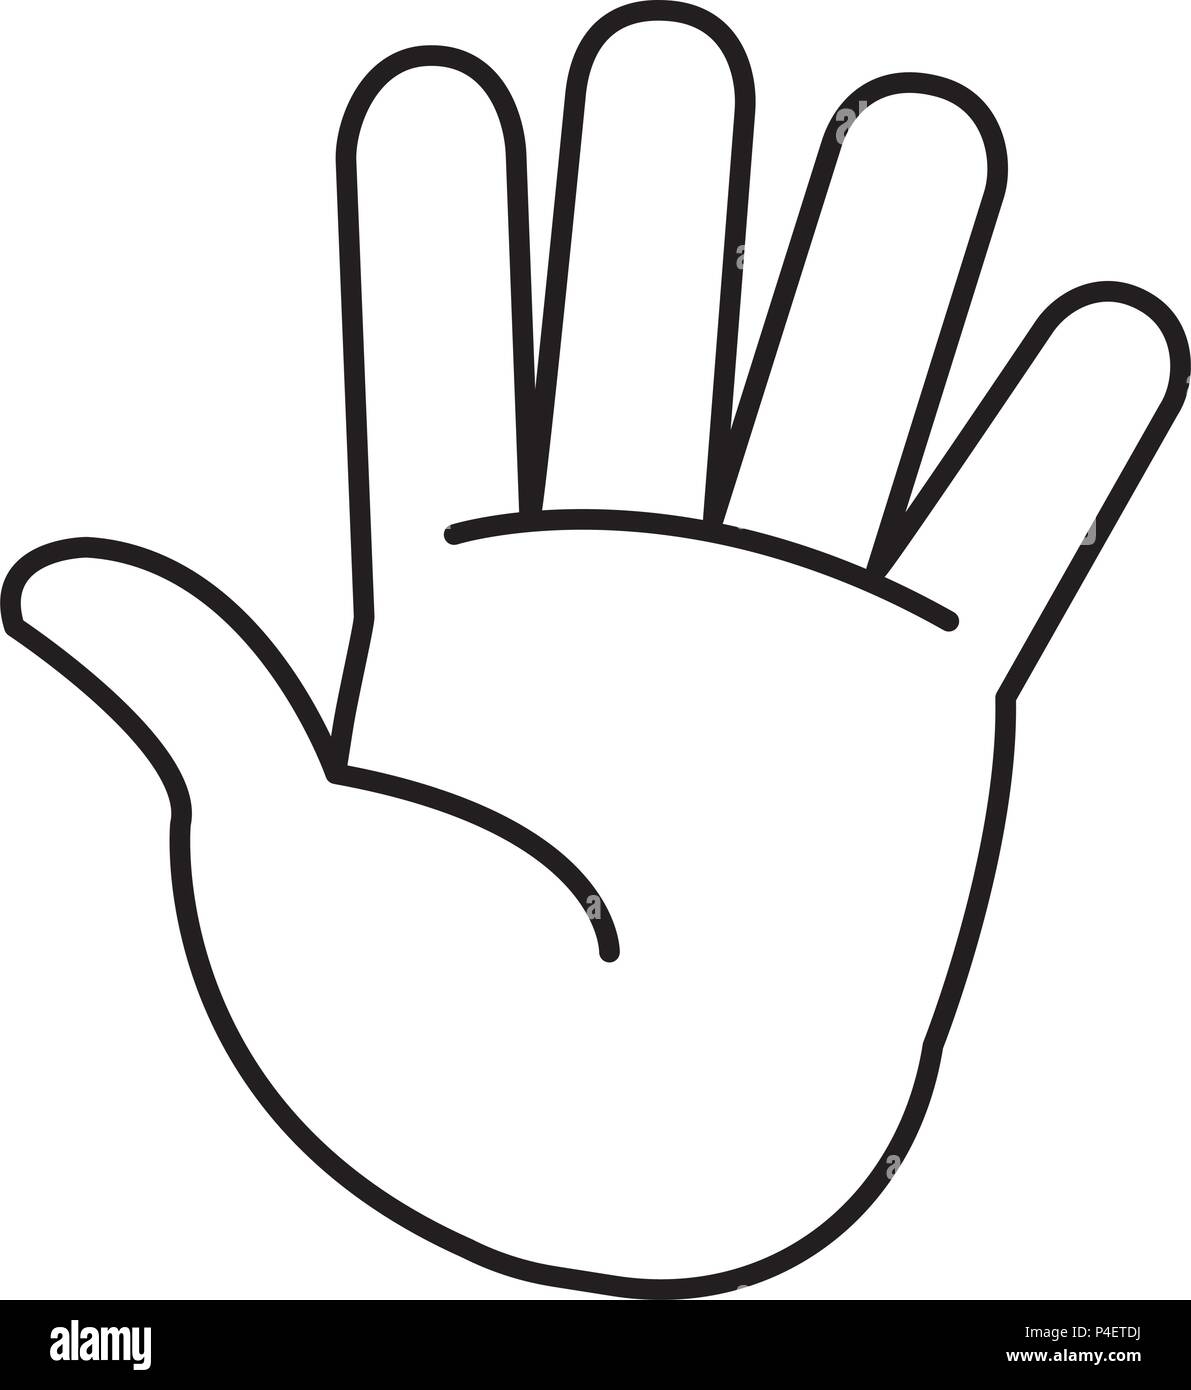 palm hand drawing